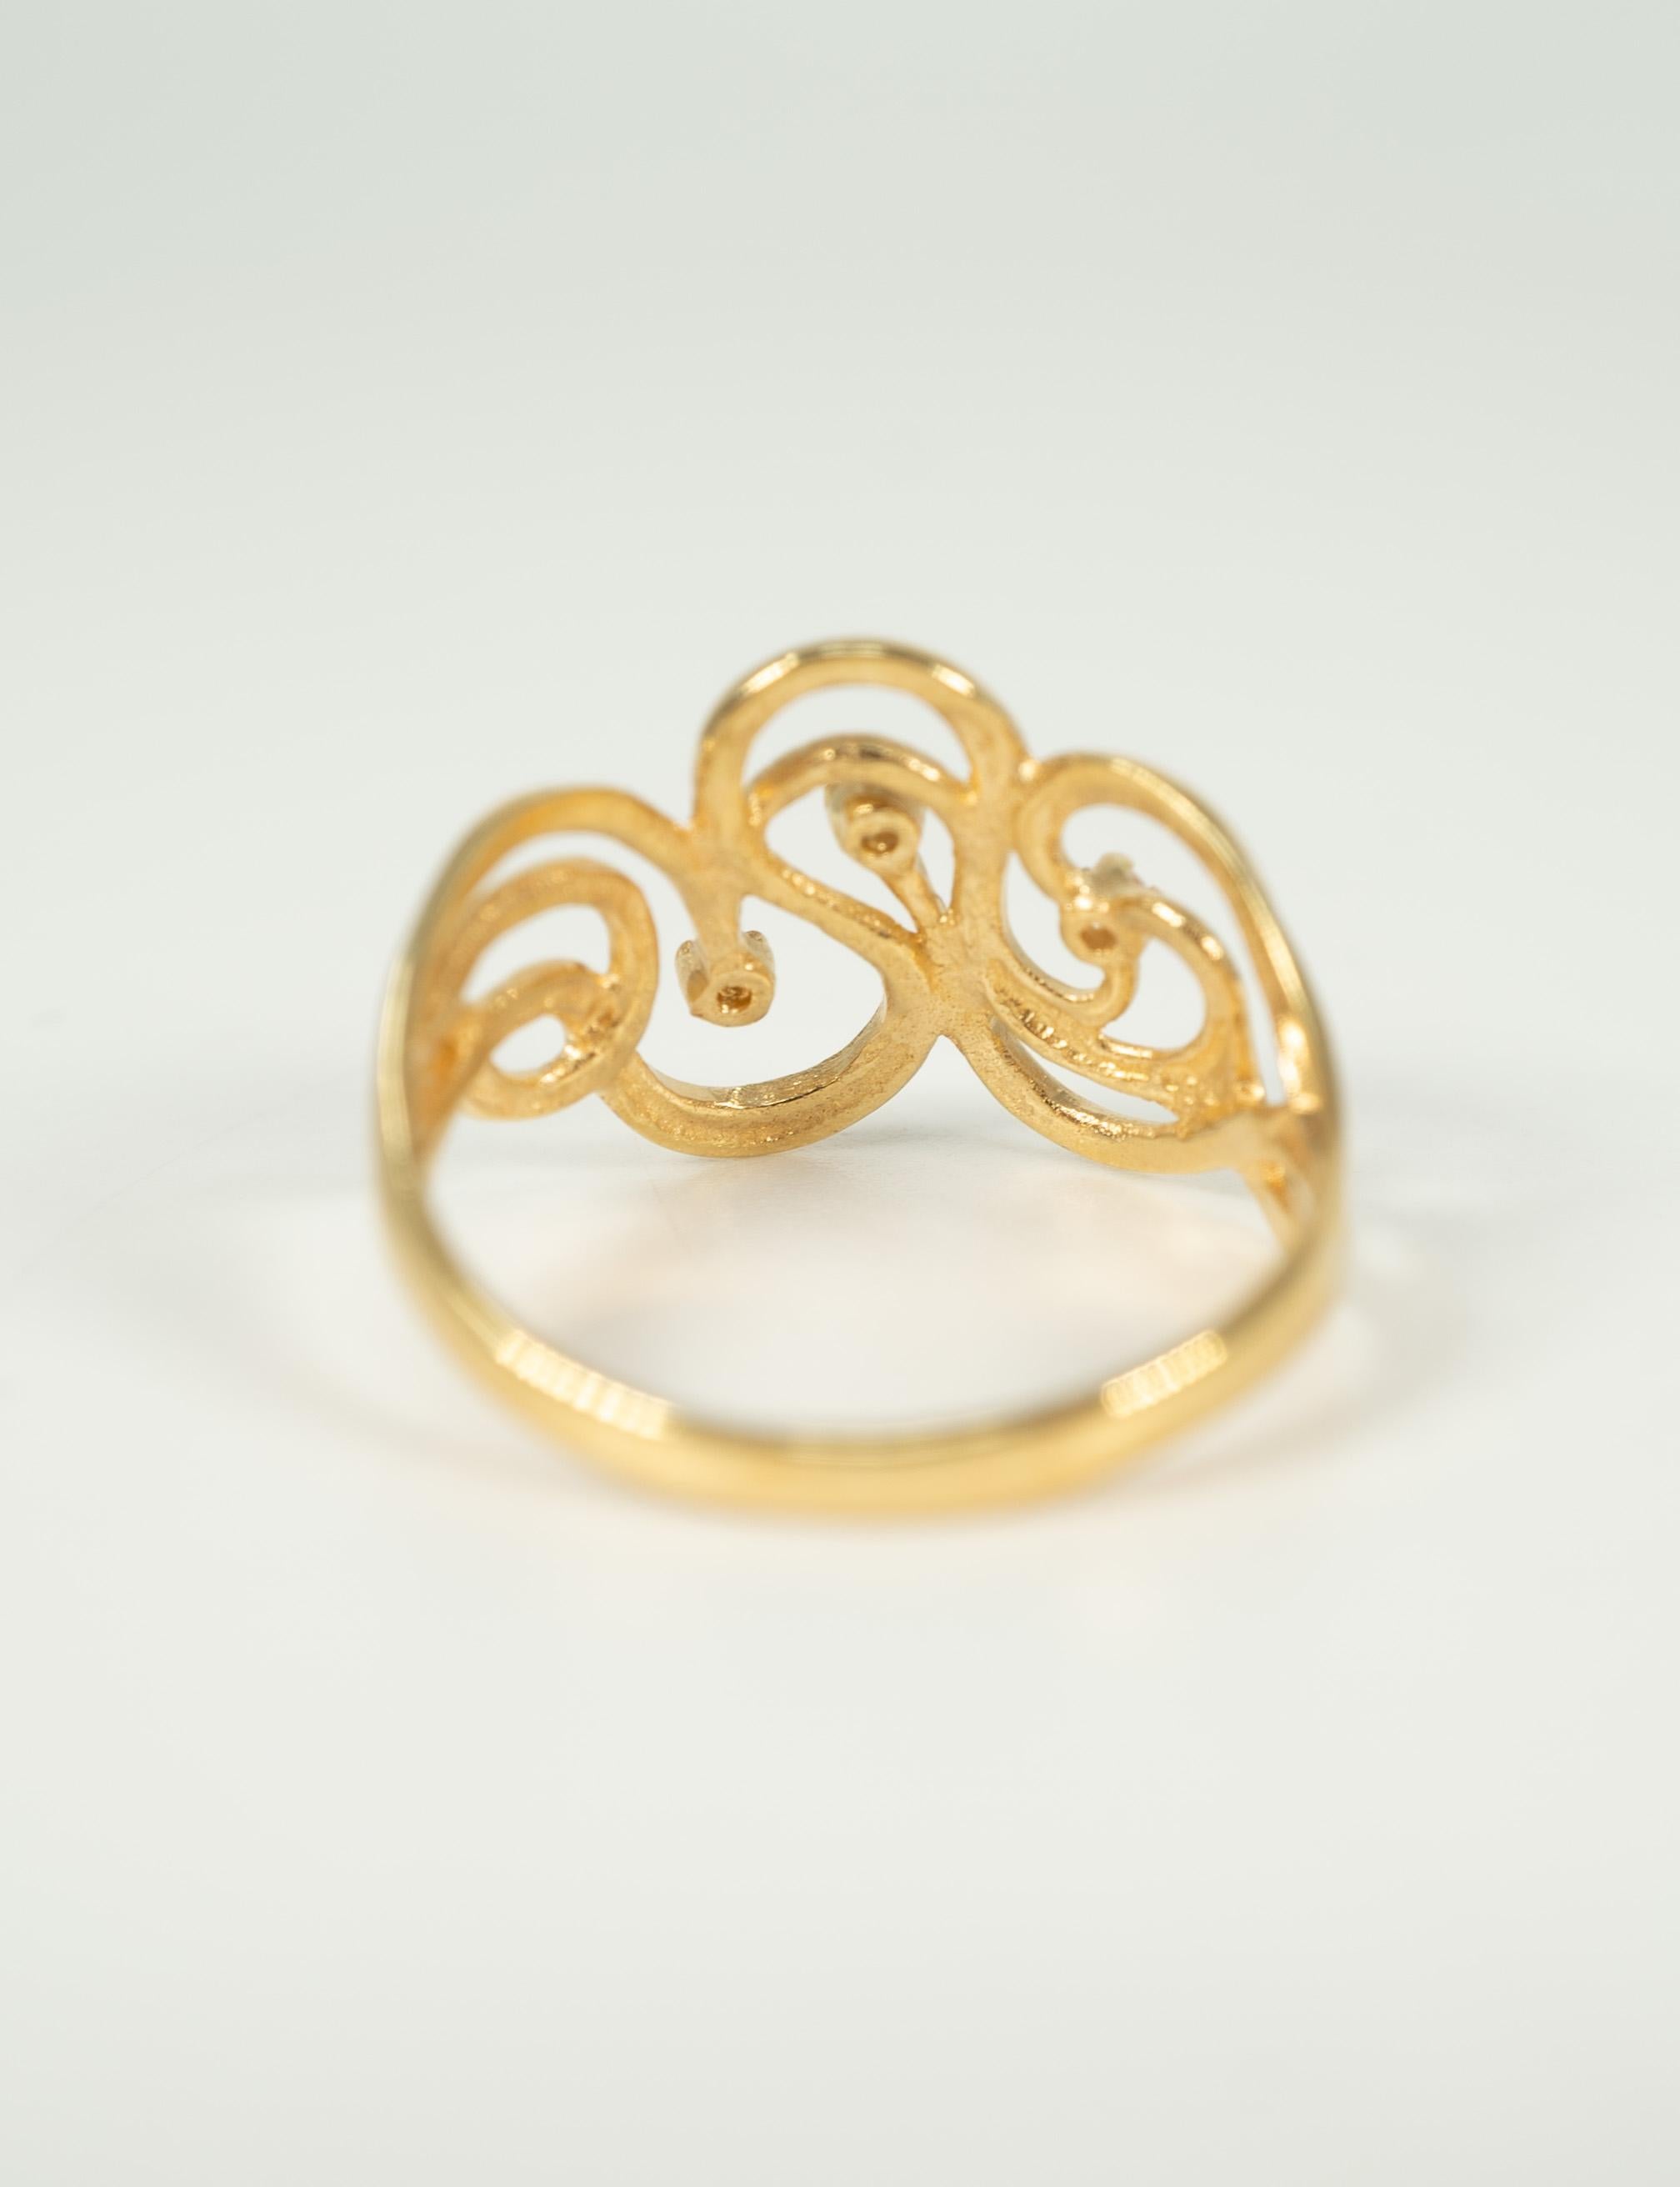 The gentle curve makes this ring a wonderful fit on your finger!